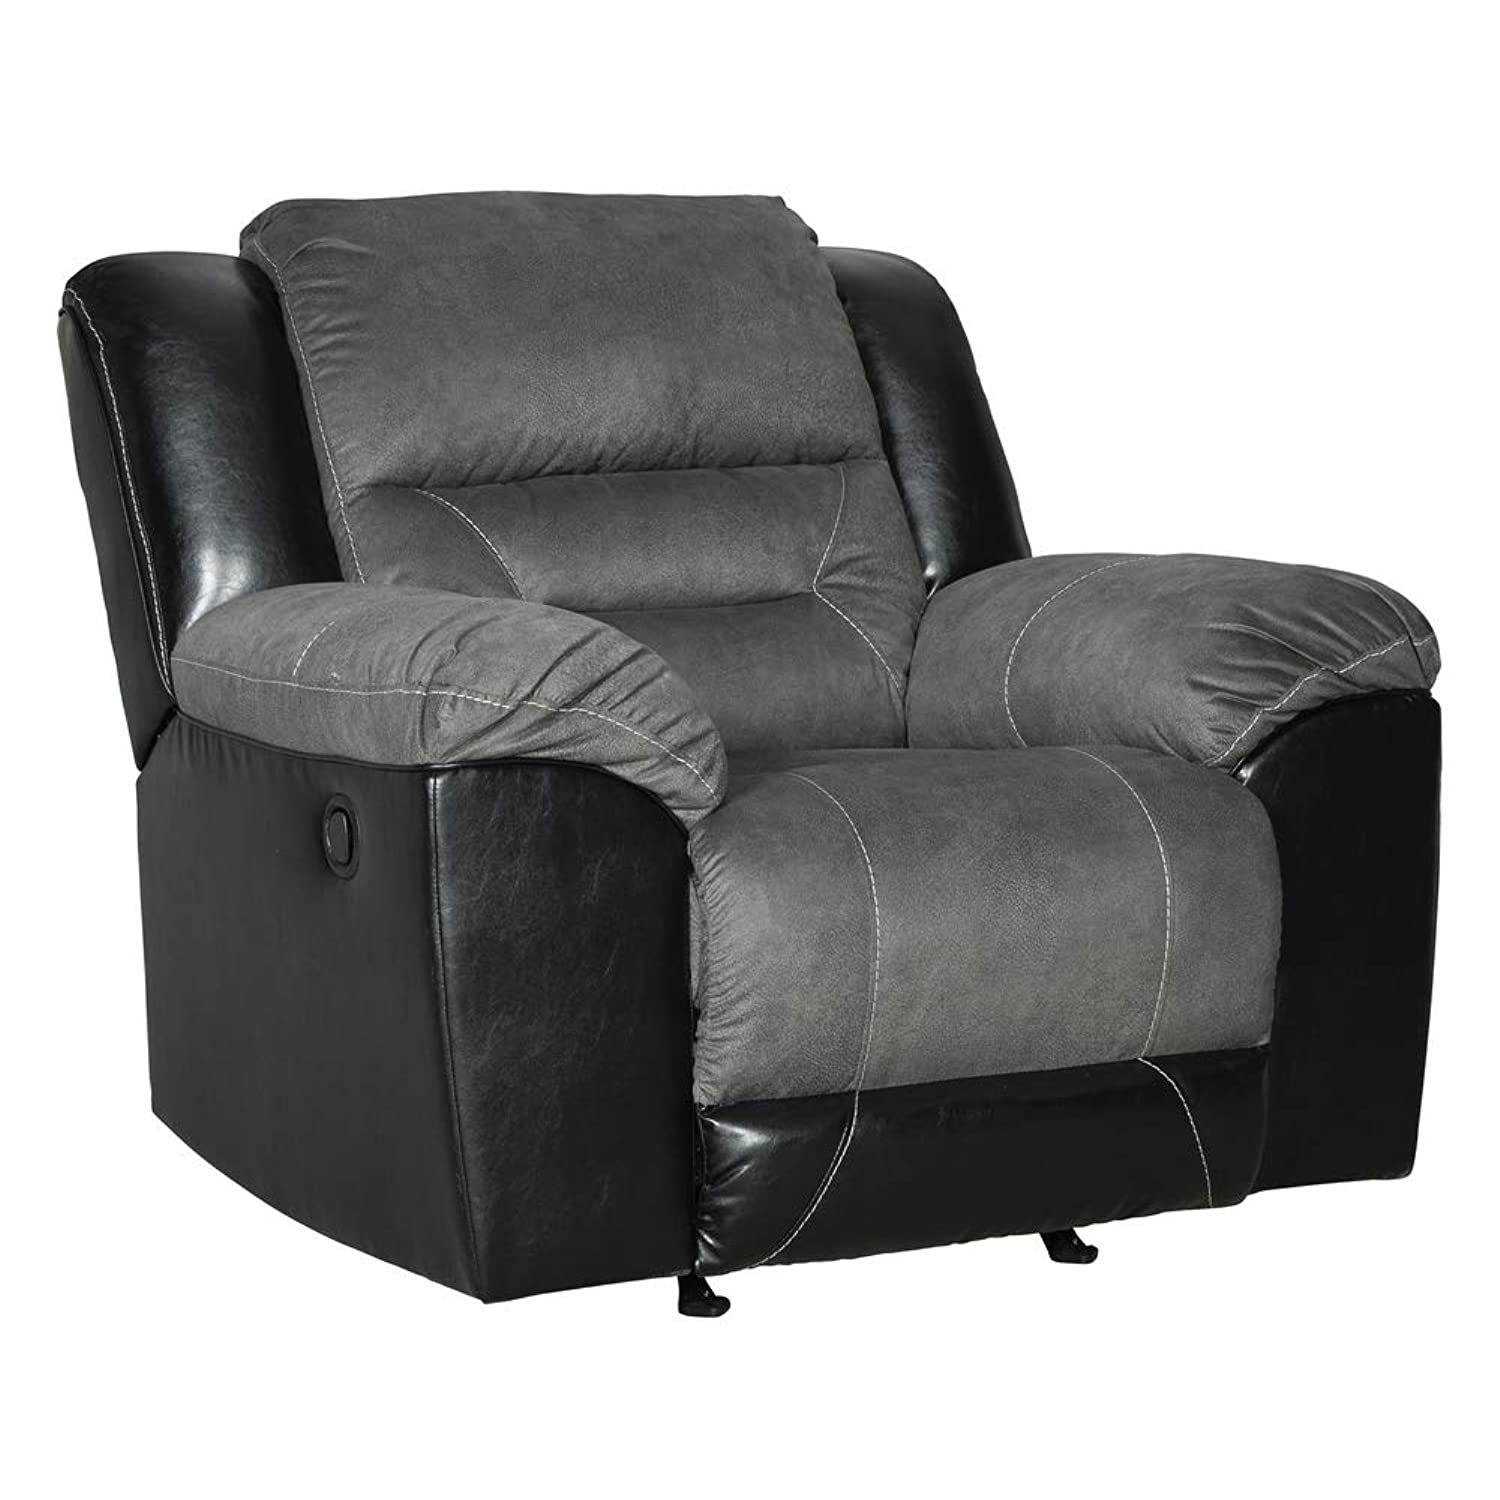 Signature Design by Ashley Earhart Faux Leather Manual Rocker Recliner, Gray - $965.99